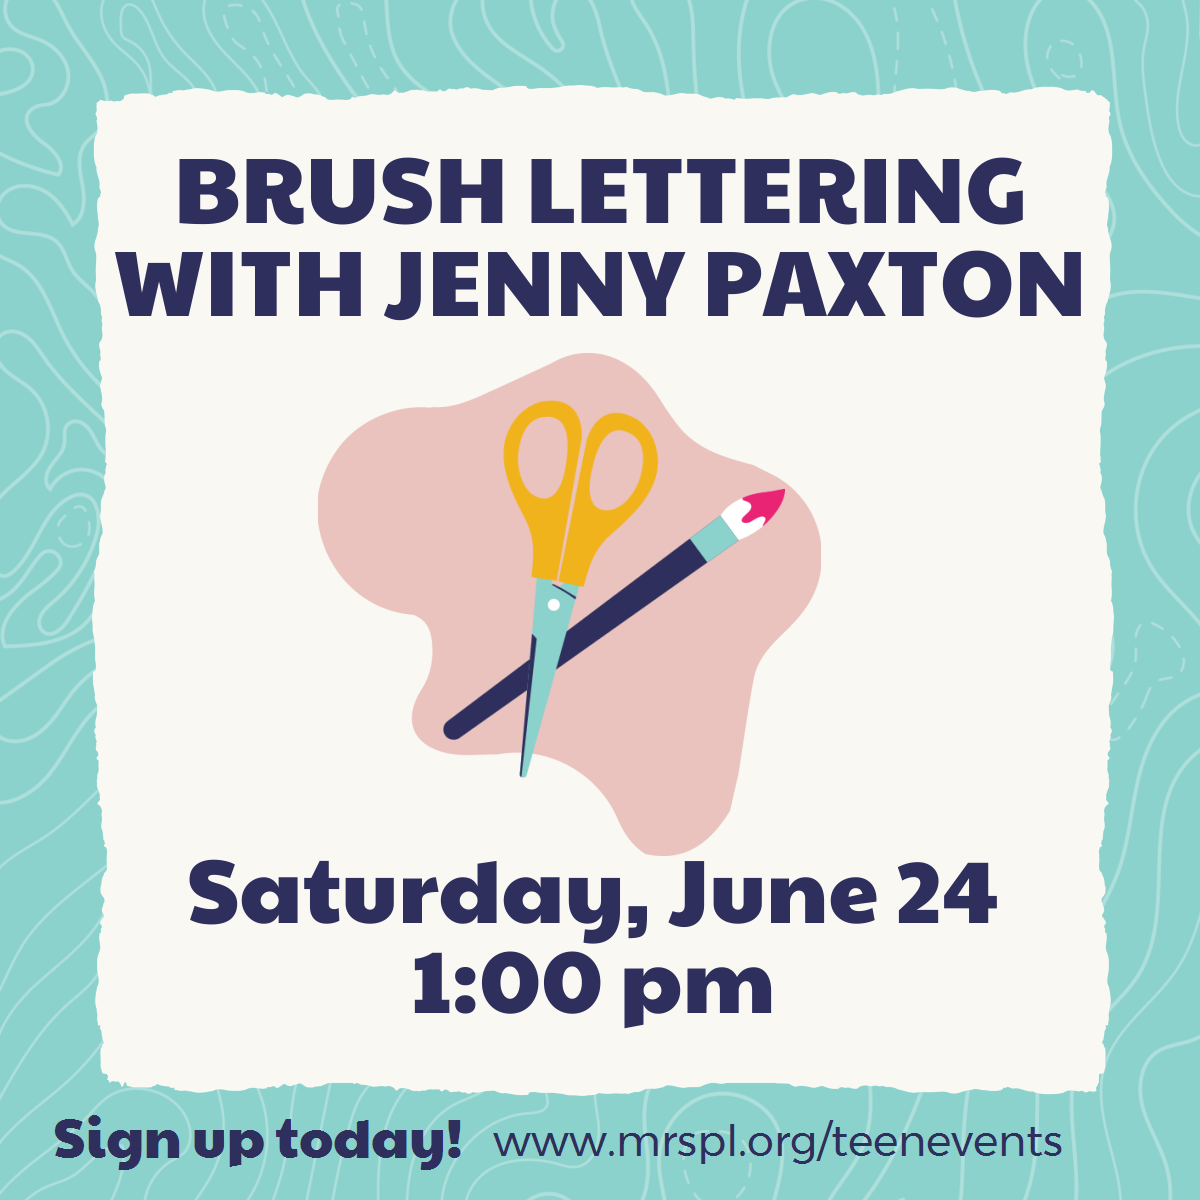 Brush Lettering with Jenny Paxton Saturday June 24 at 1pm